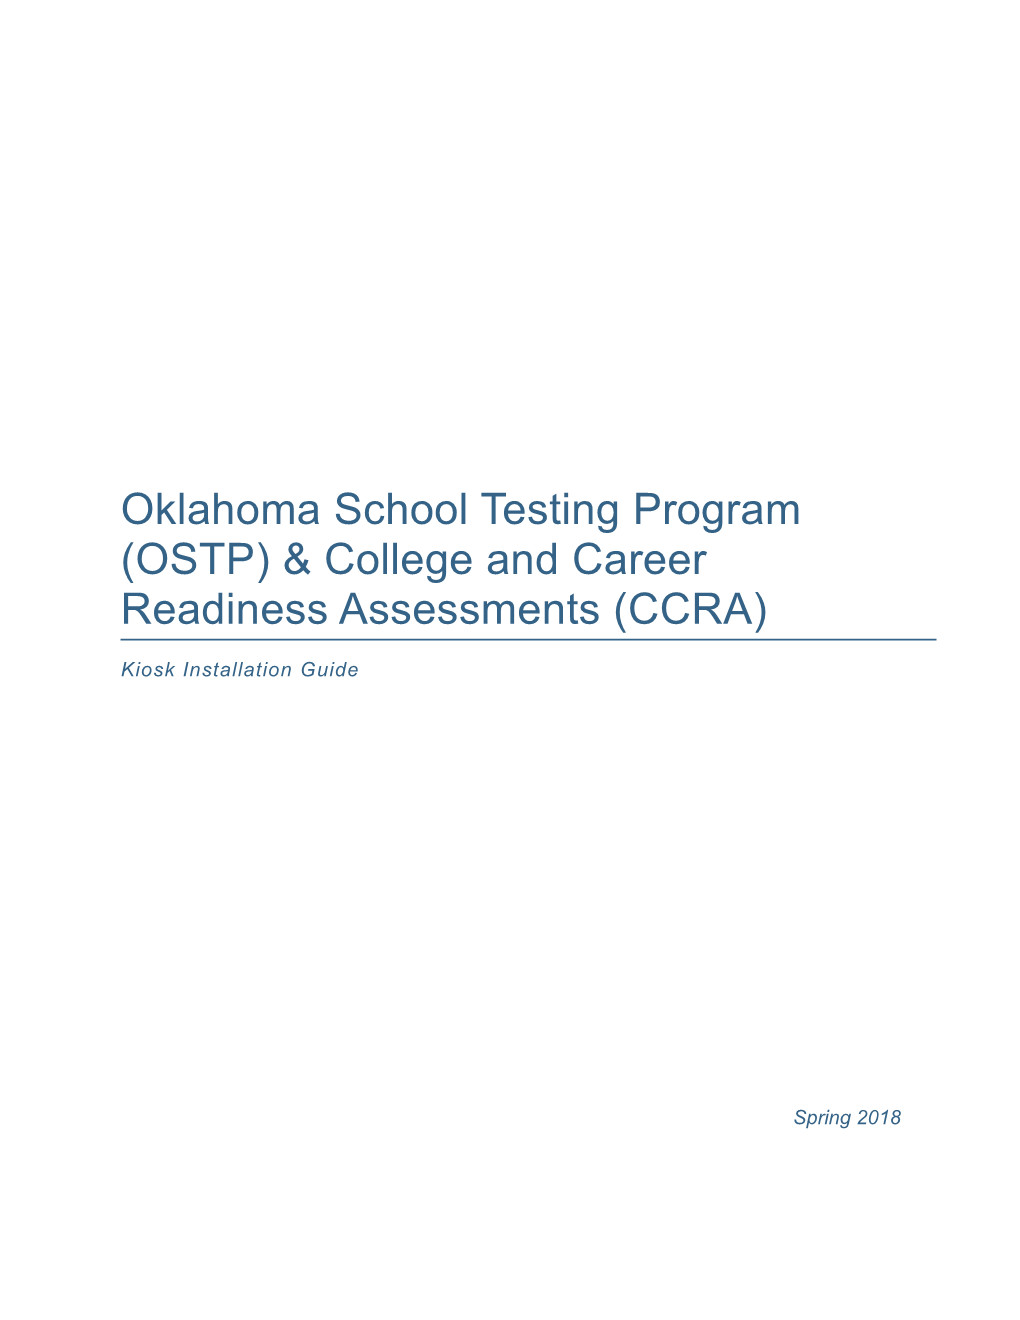 Oklahoma School Testing Program (OSTP) & College and Career Readiness Assessments (CCRA)